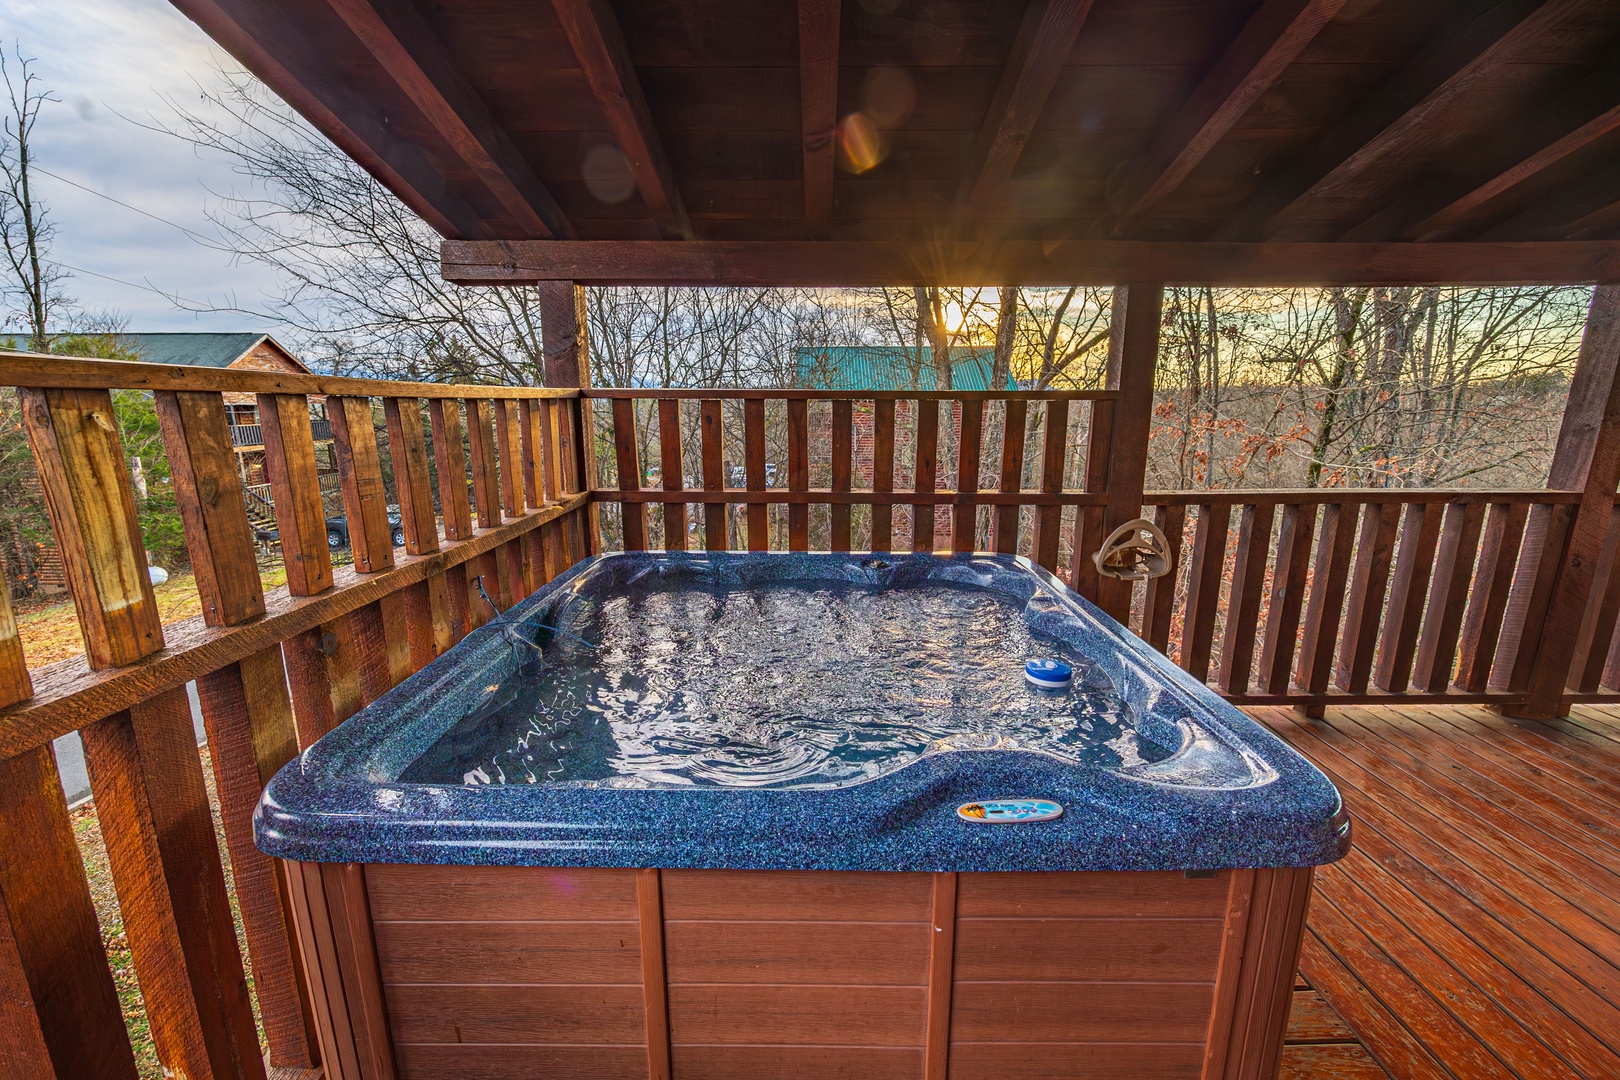 Hot Tub at Hickernut Lodge, a 5-bedroom cabin rental located in Pigeon Forge